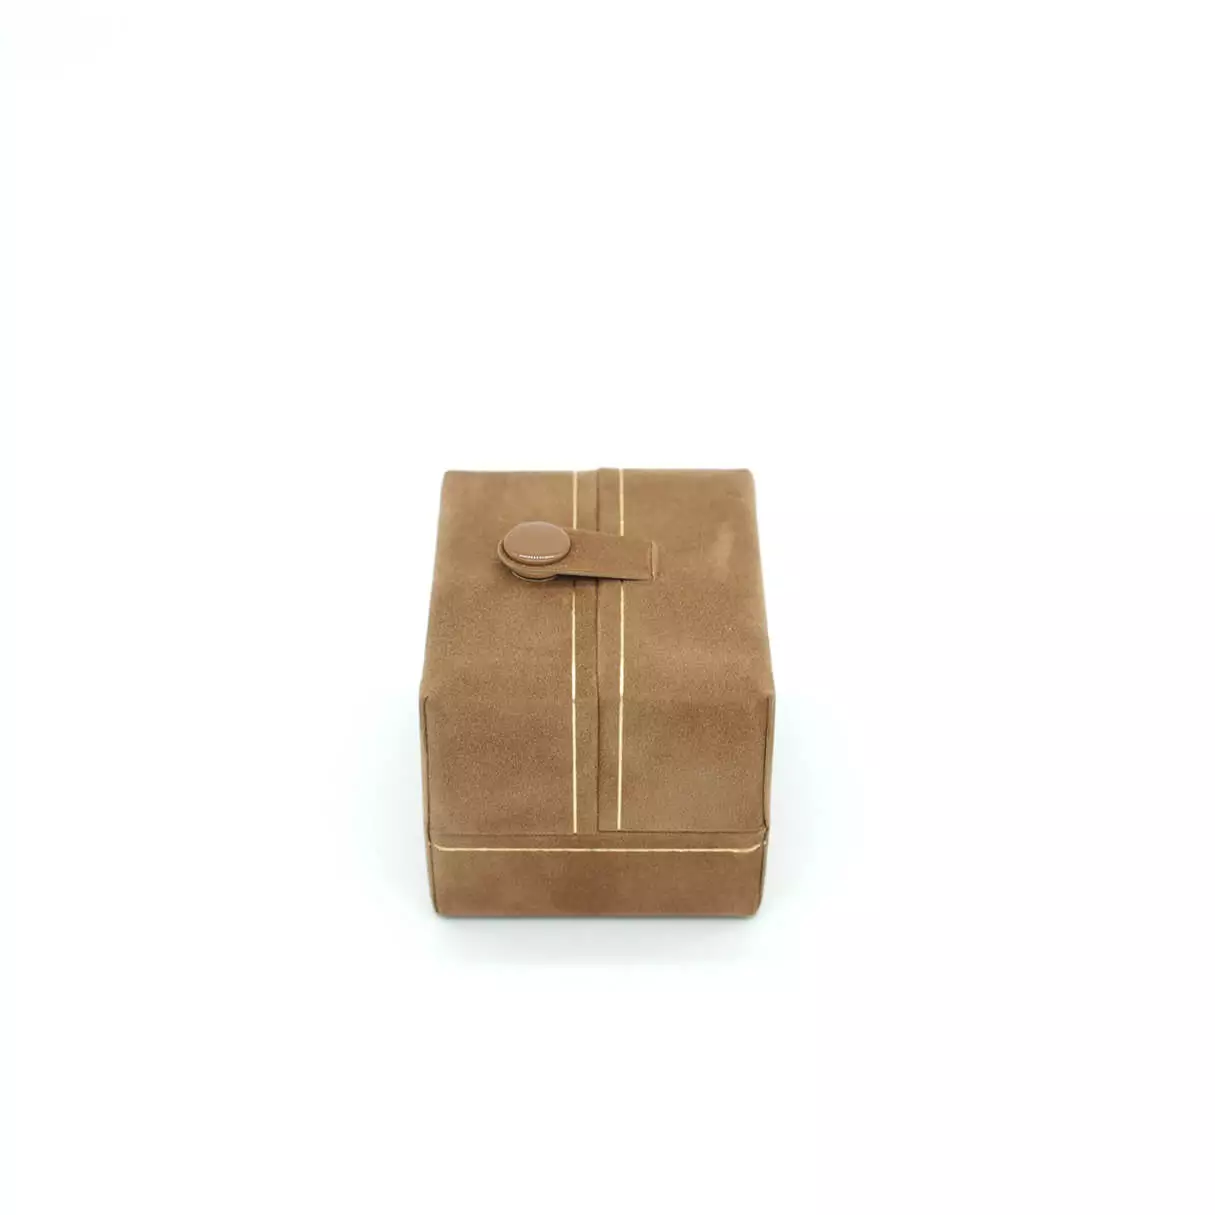 valentina ring box in brown one ring slot